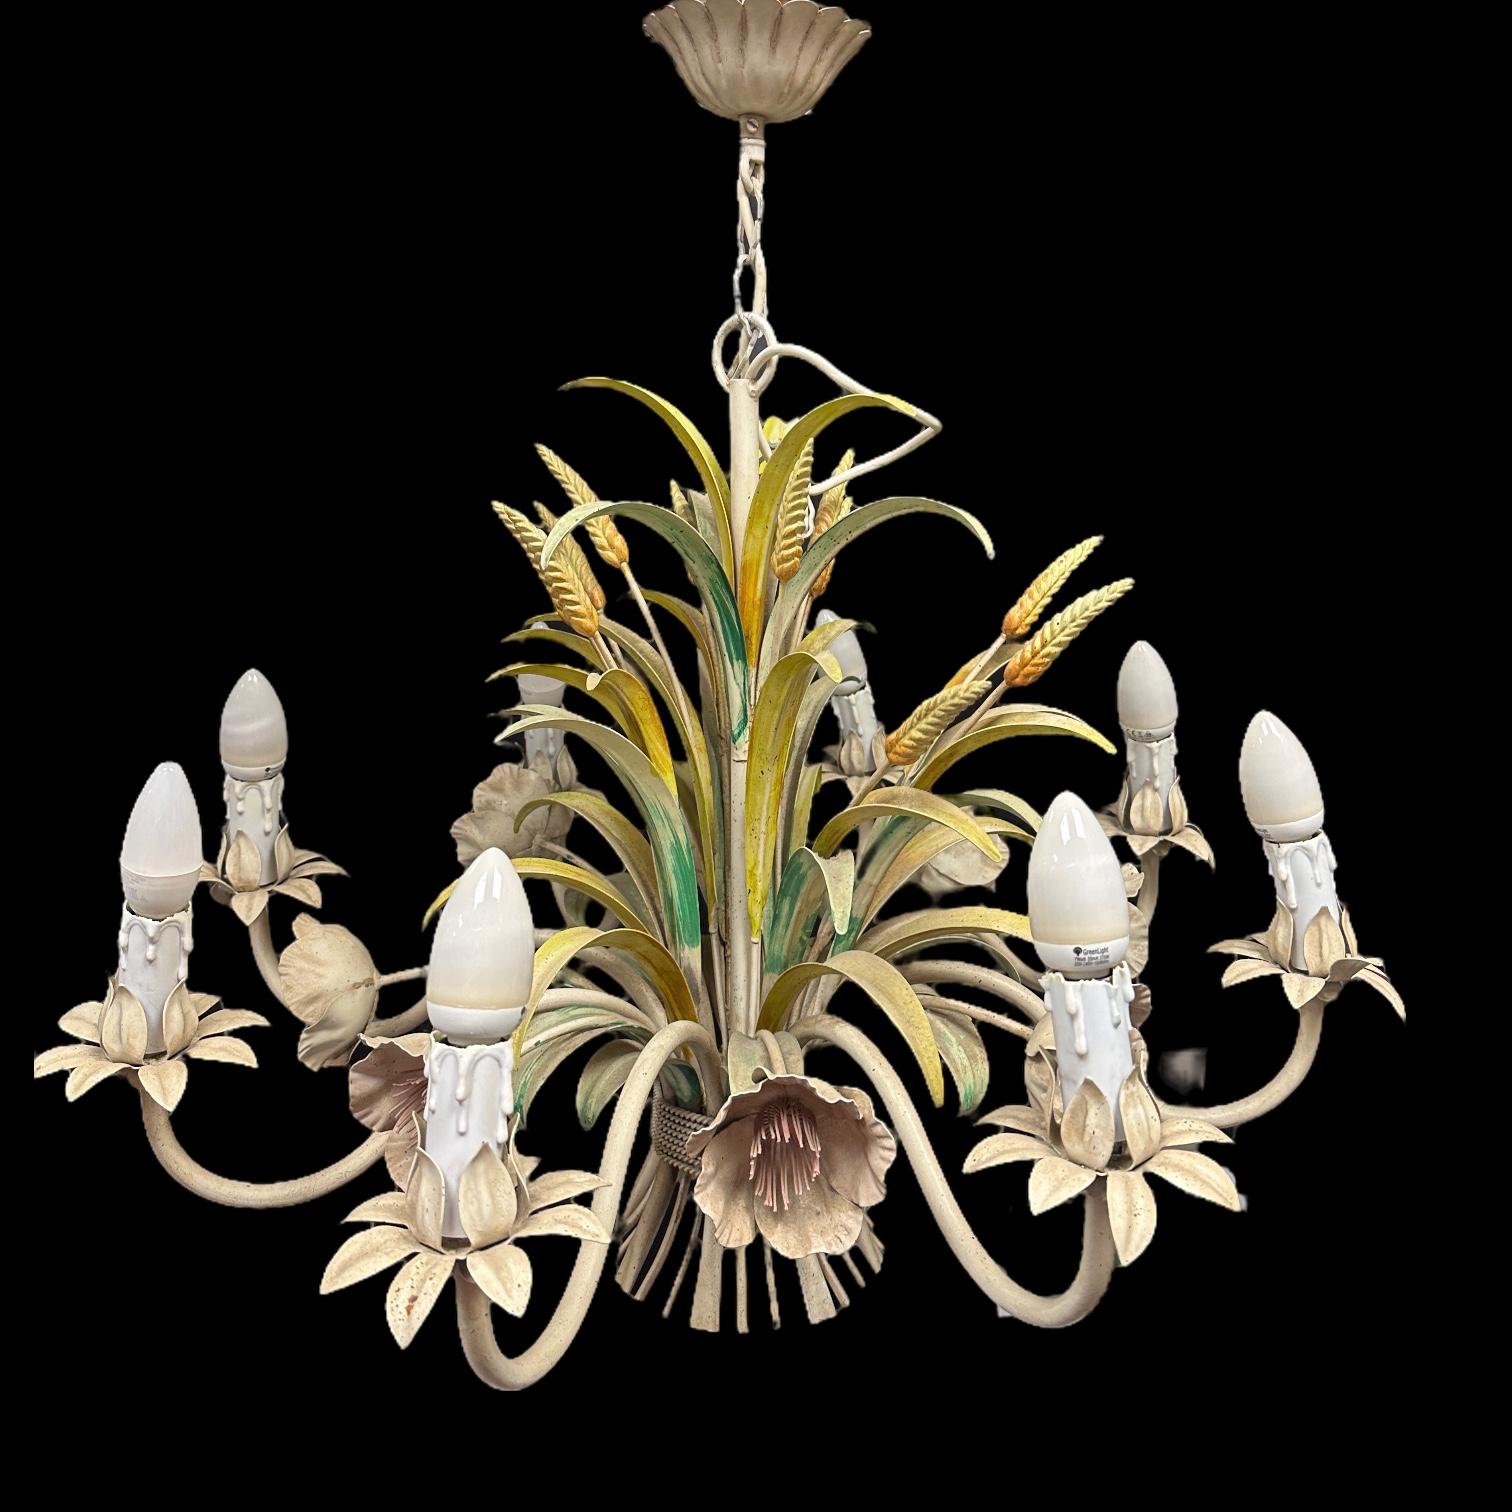 Petite Florentine style eight-light chandelier. Functions as is with eight E14 / 110 Volt light bulbs. Can take up to 40 Watts each bulb. Beautiful colored metal grasses and leaves chandelier. It gives a very warm light and represents the Italian